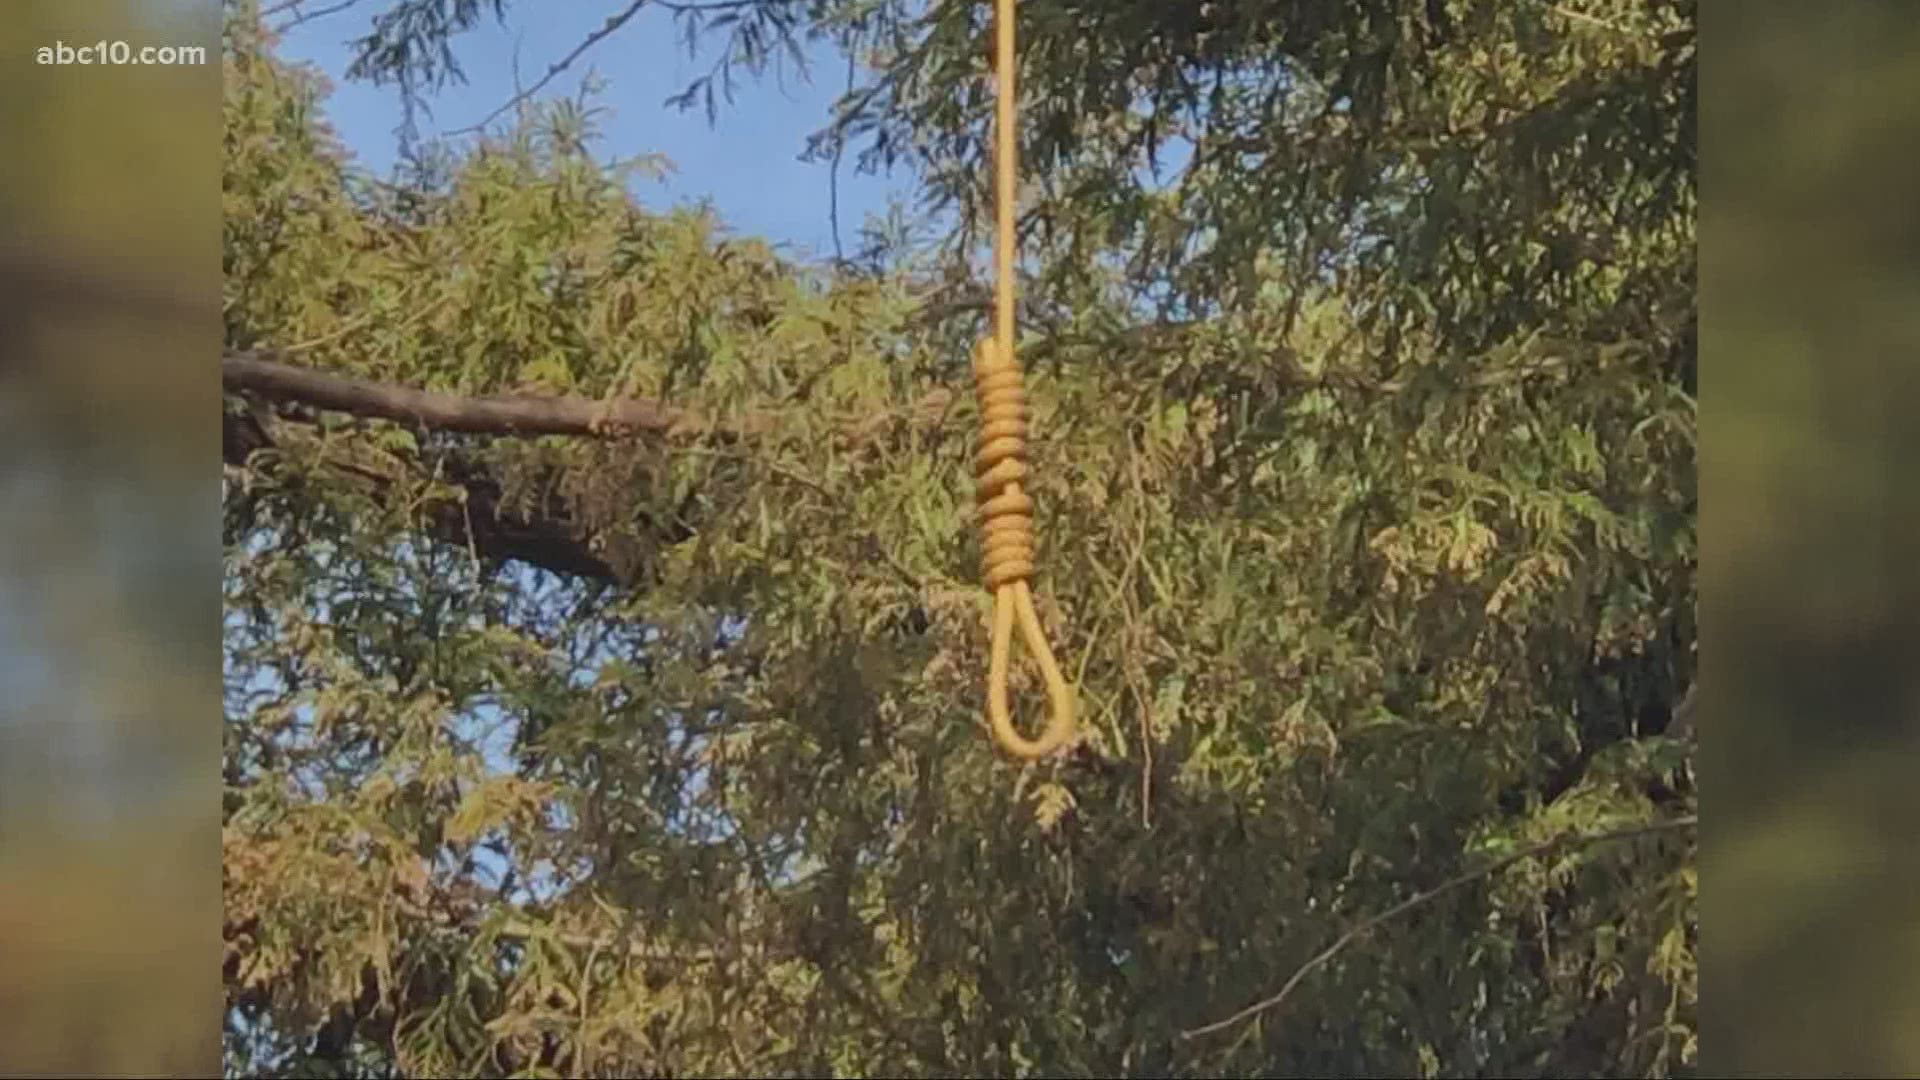 A noose was discovered hanging from a utility line in Placerville, and community members are worried about why it was placed there.